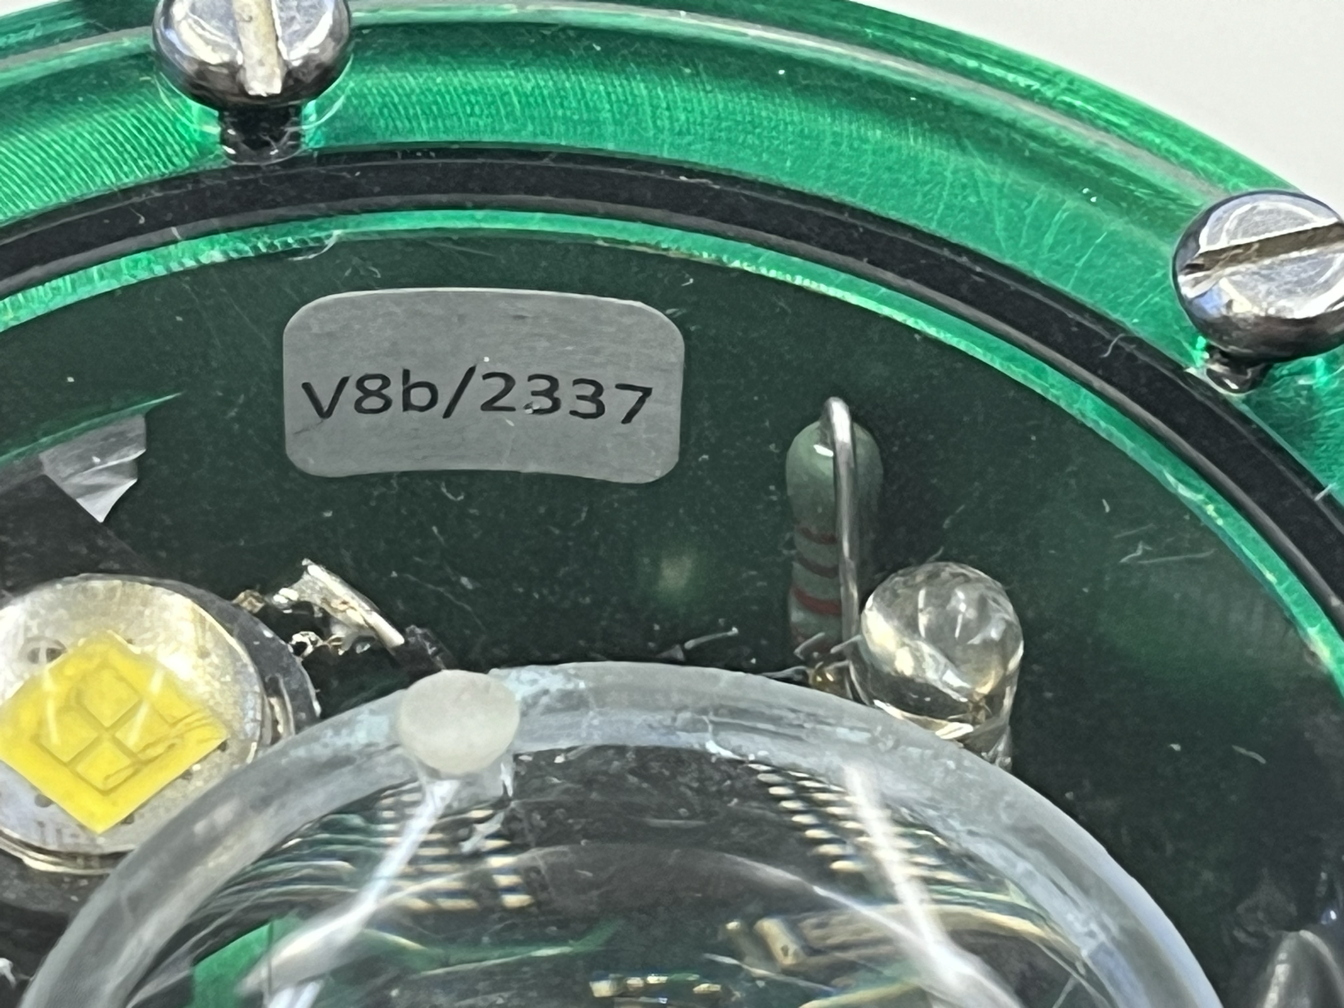 Serial numbers inside in Scurion lamps